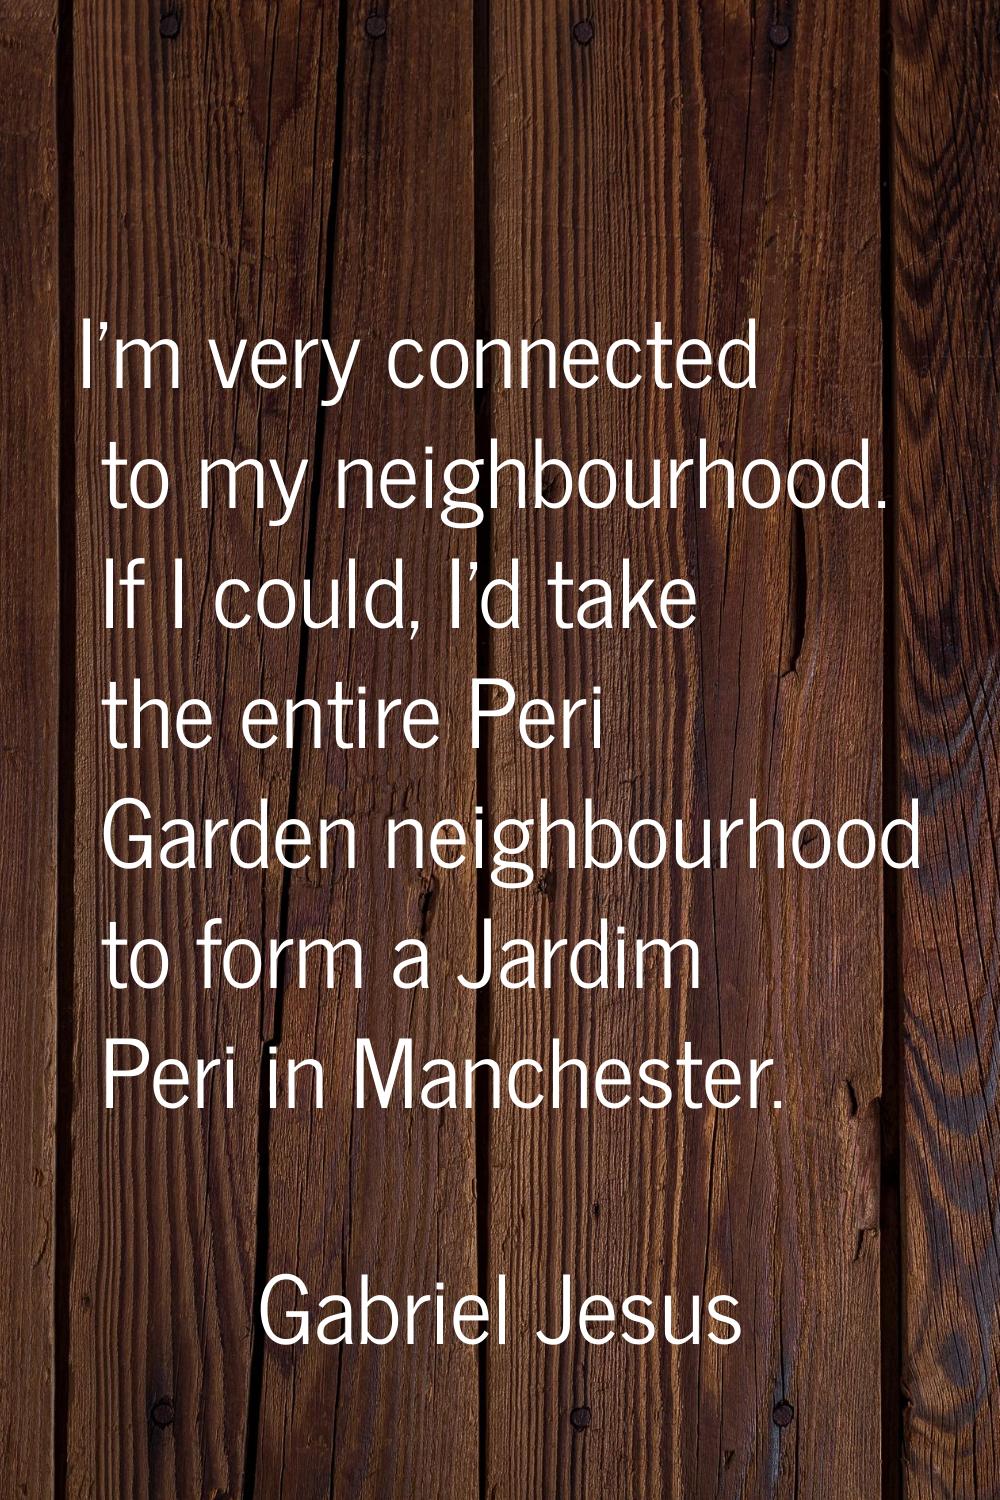 I'm very connected to my neighbourhood. If I could, I'd take the entire Peri Garden neighbourhood t